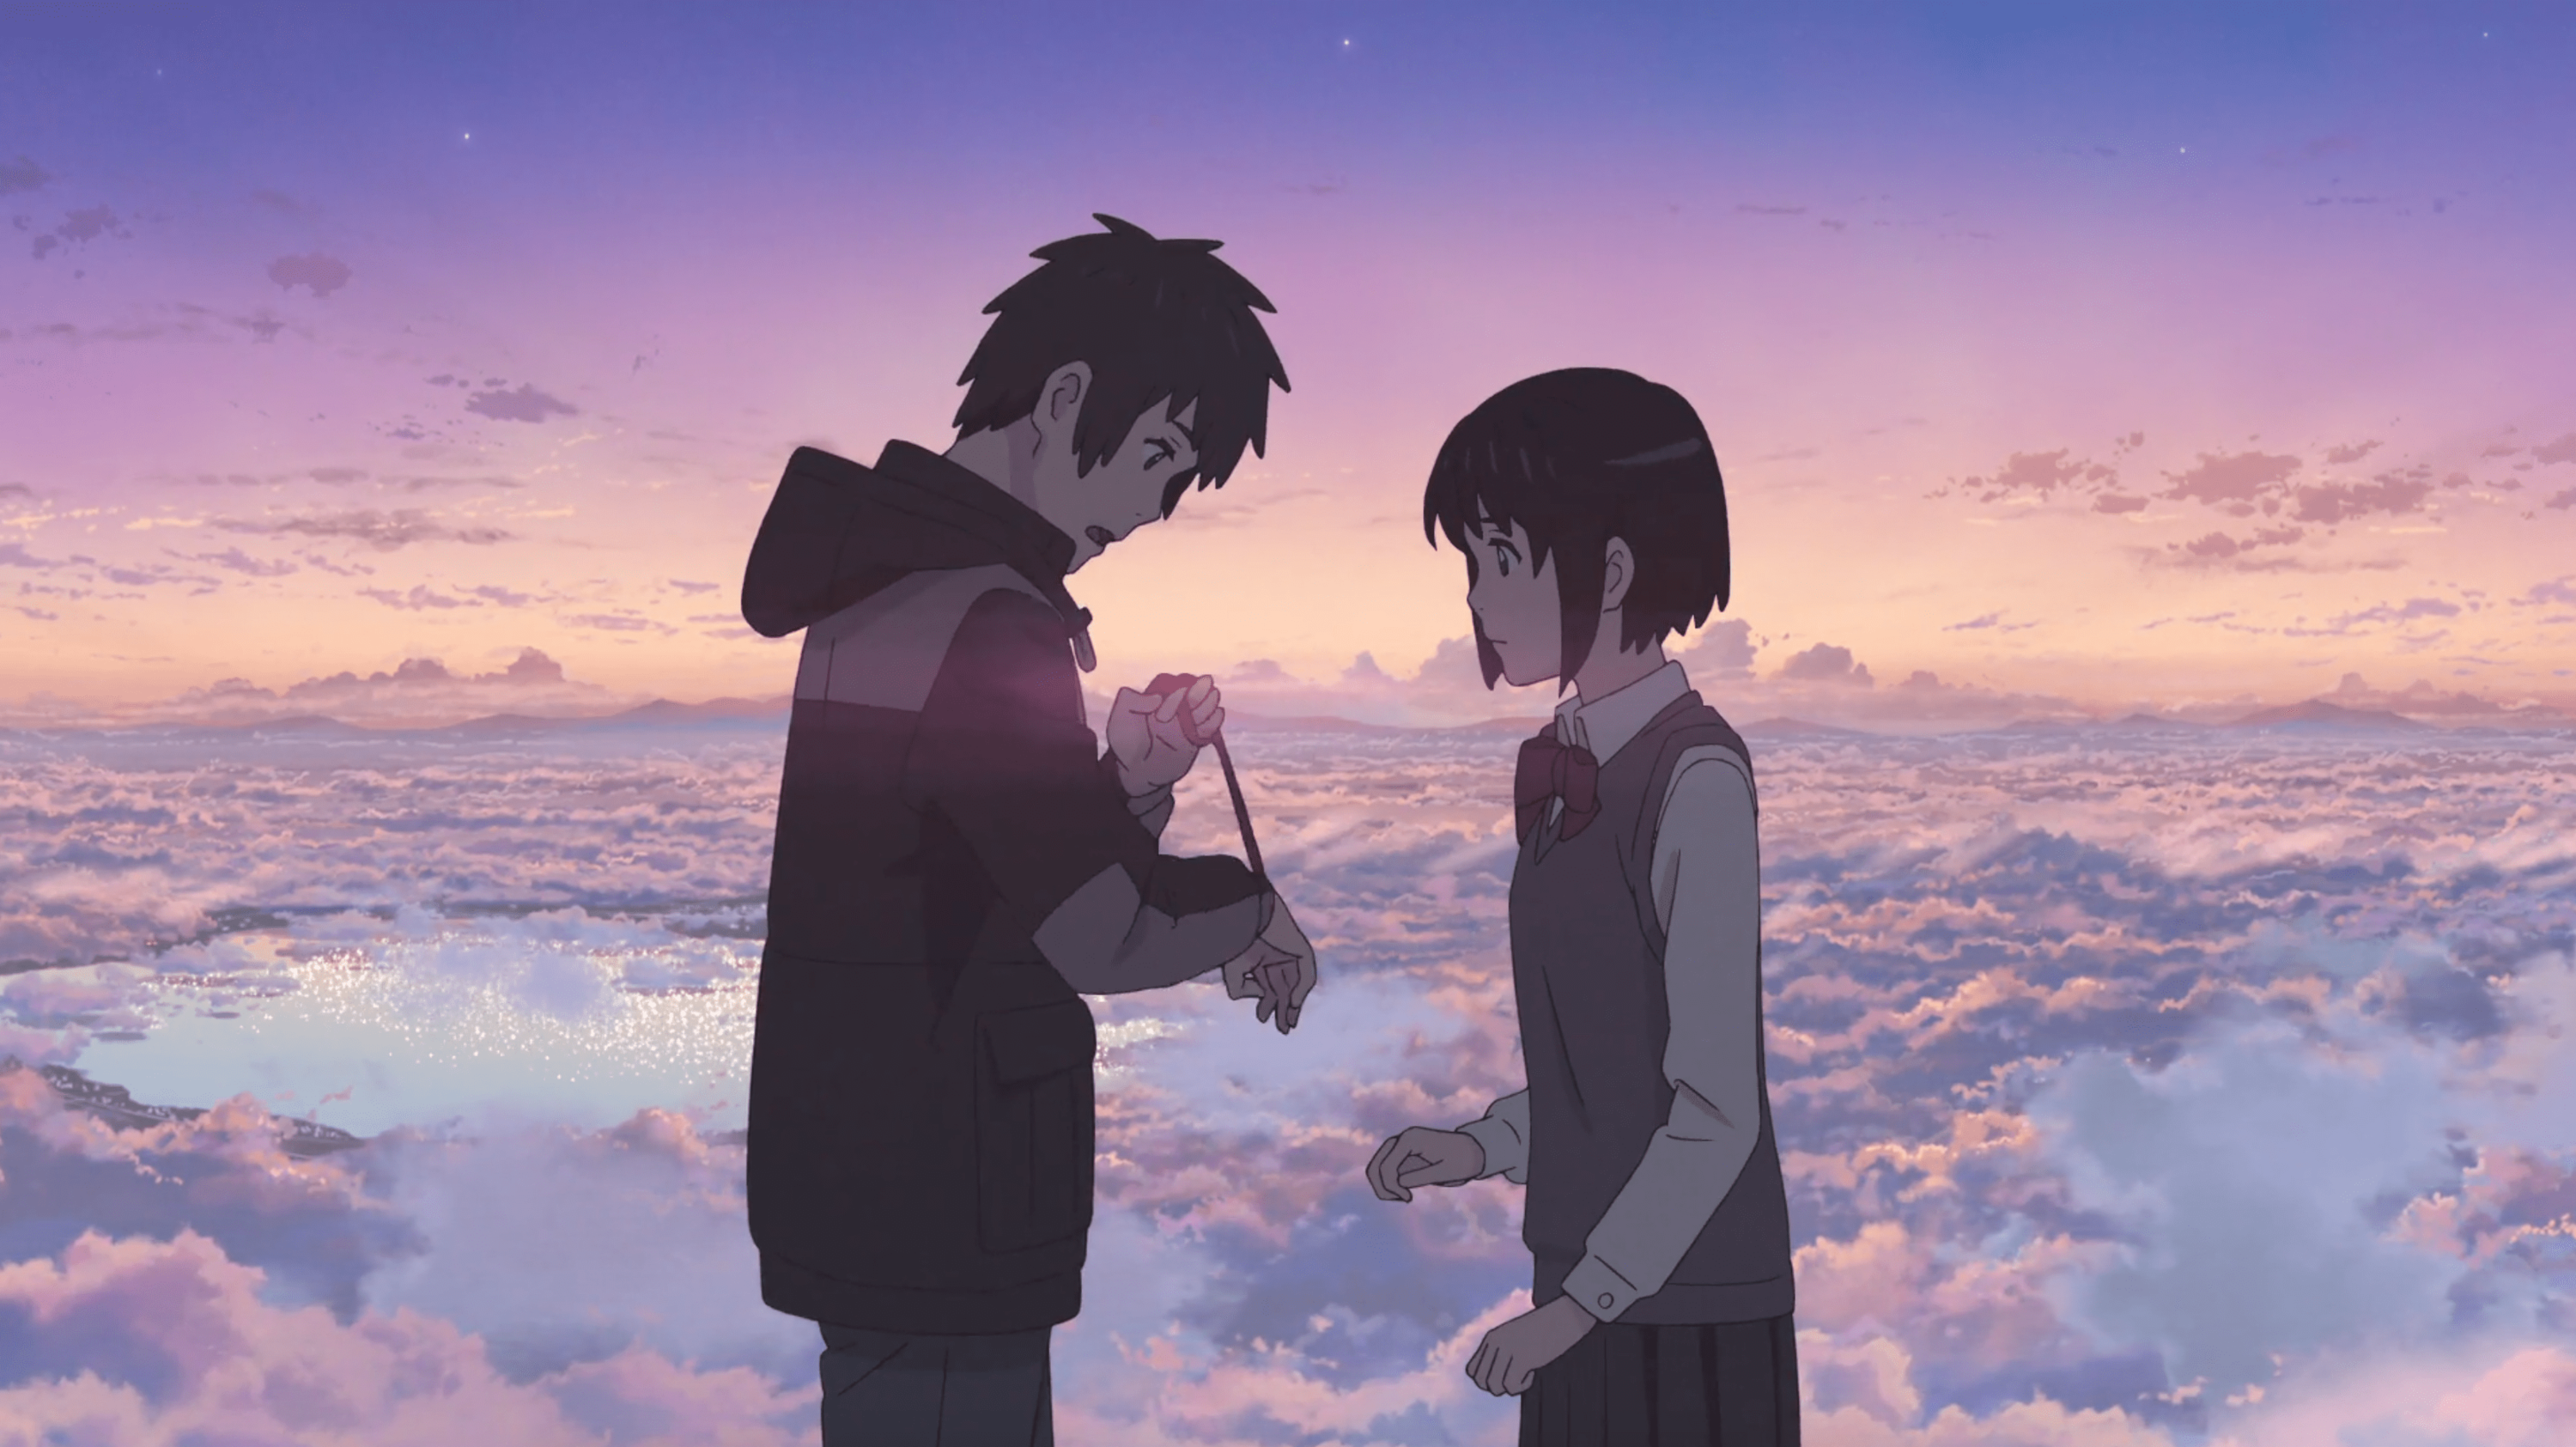 Taki and Mitsuha meeting face to face in &quot;Your Name&quot;